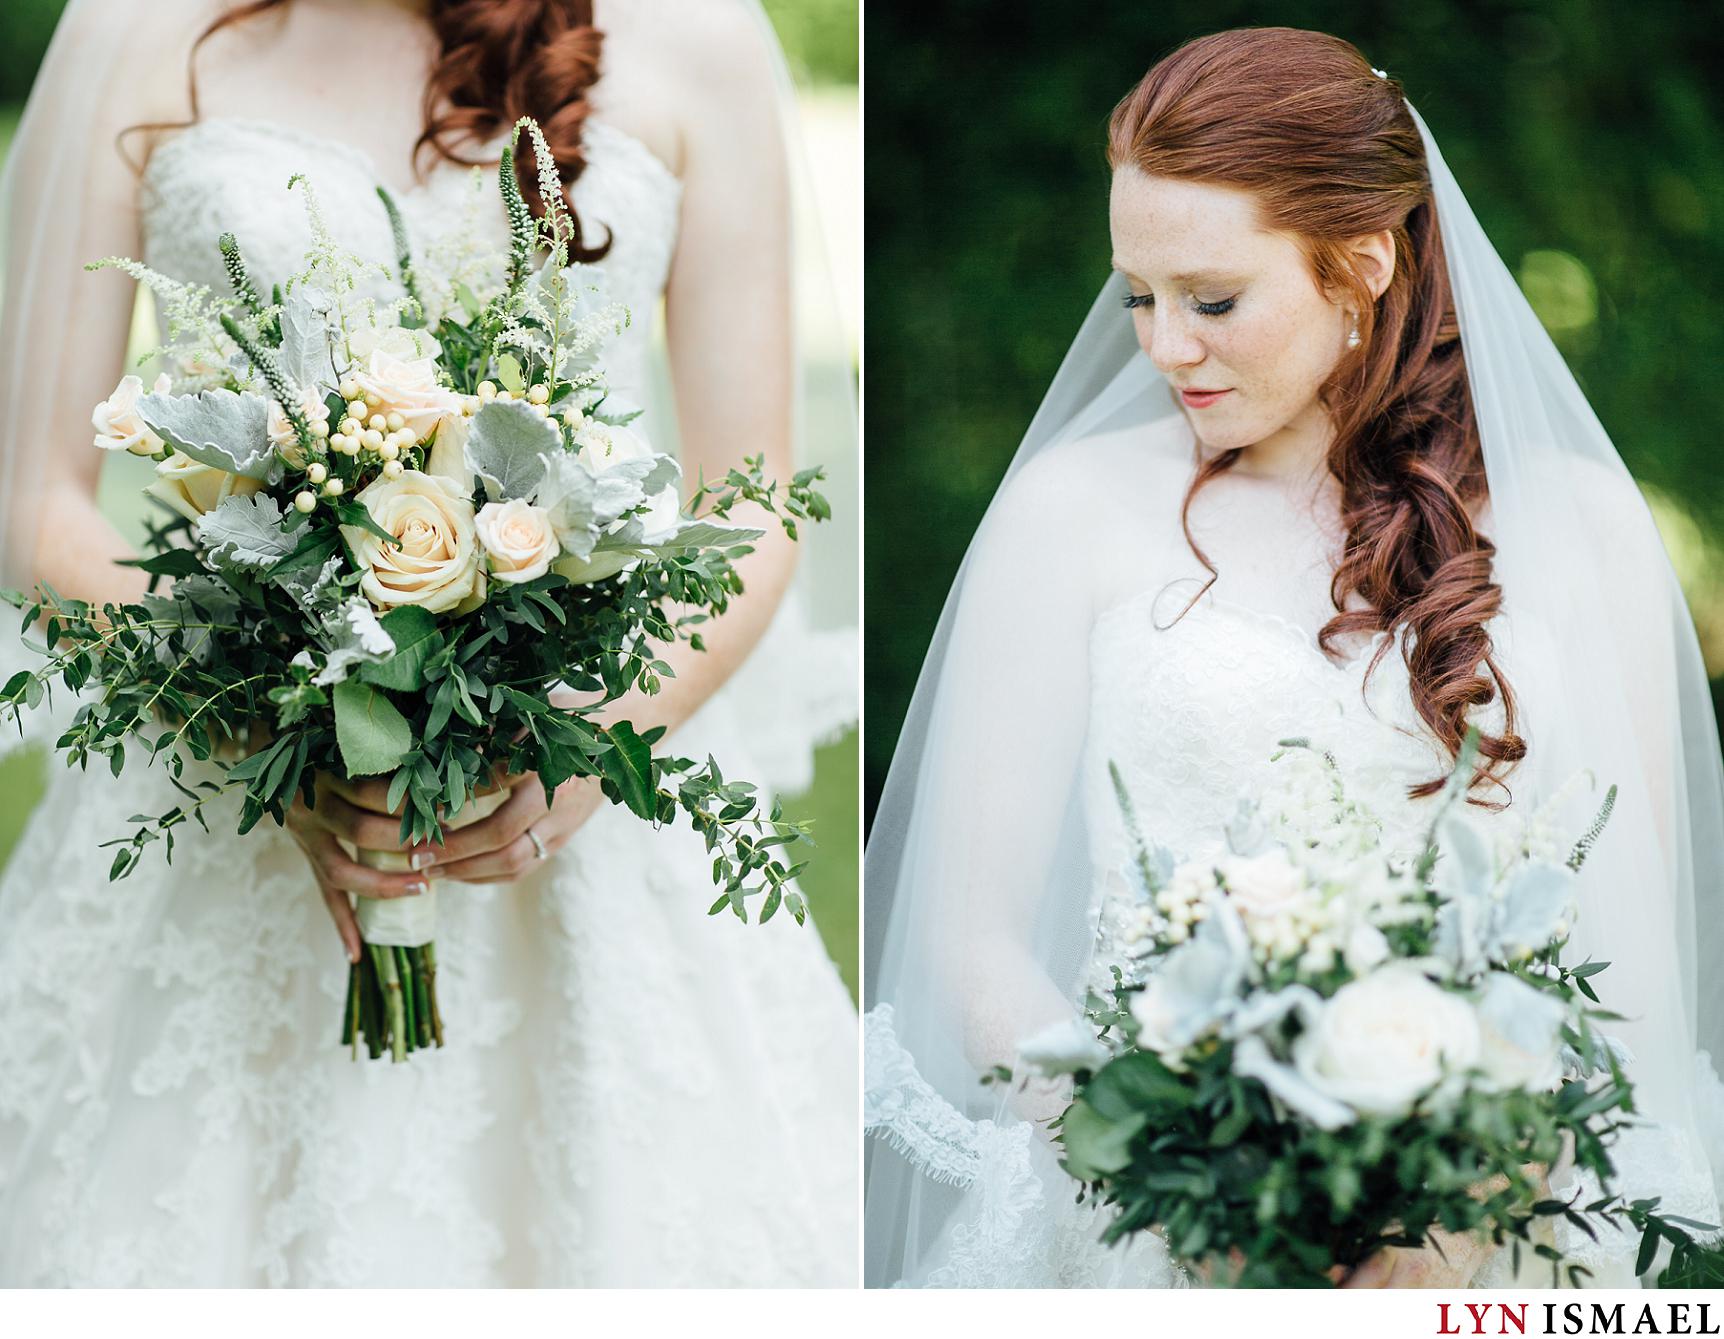 Portrait of the bride and a detail shot of her bouquet